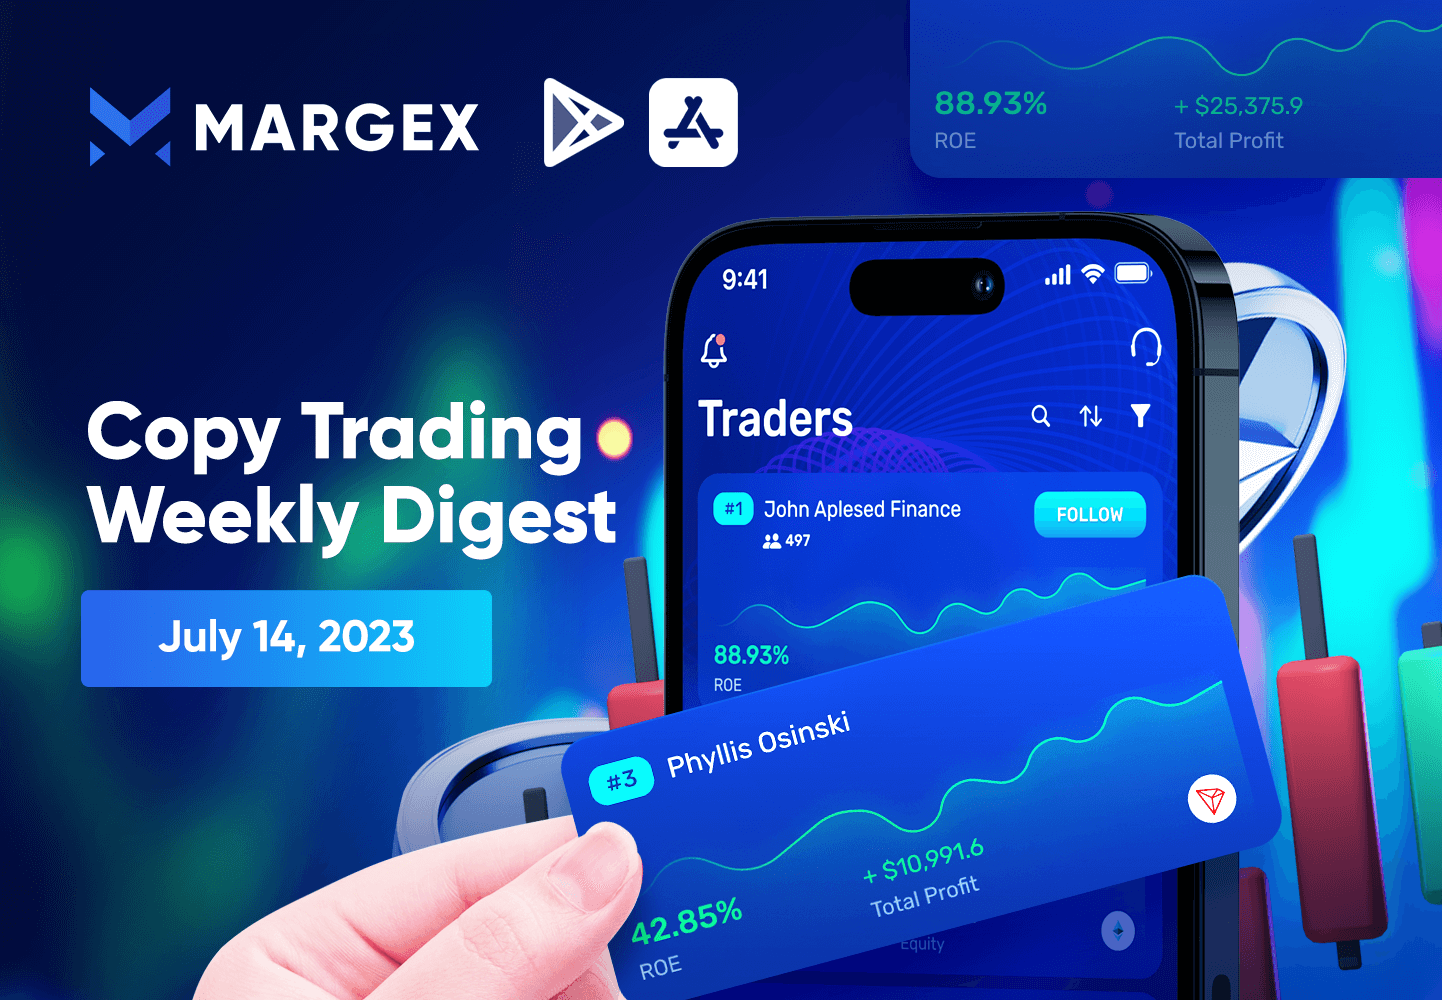 Copy Trading Weekly Digest: July 14, 2023